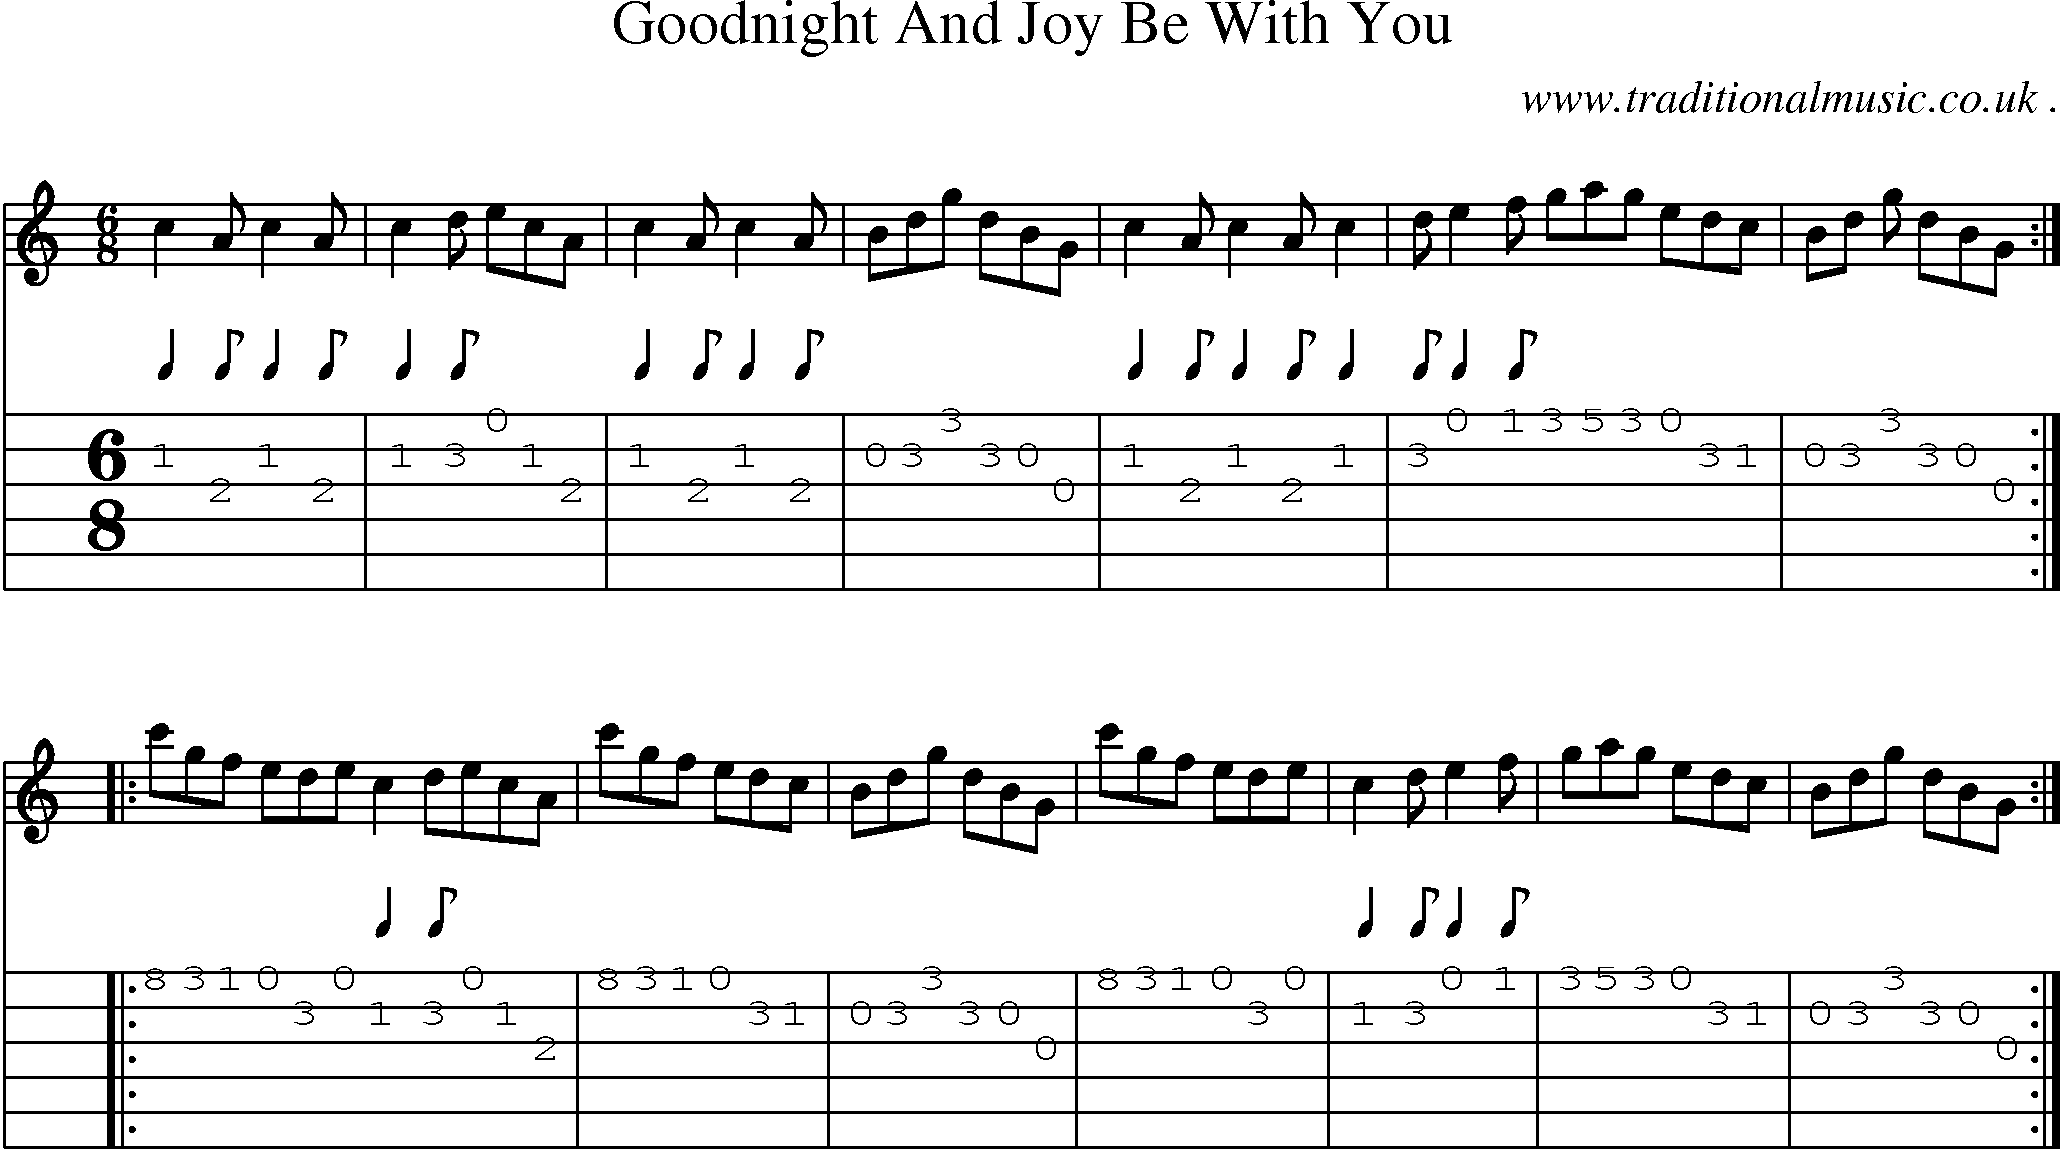 Sheet-Music and Guitar Tabs for Goodnight And Joy Be With You